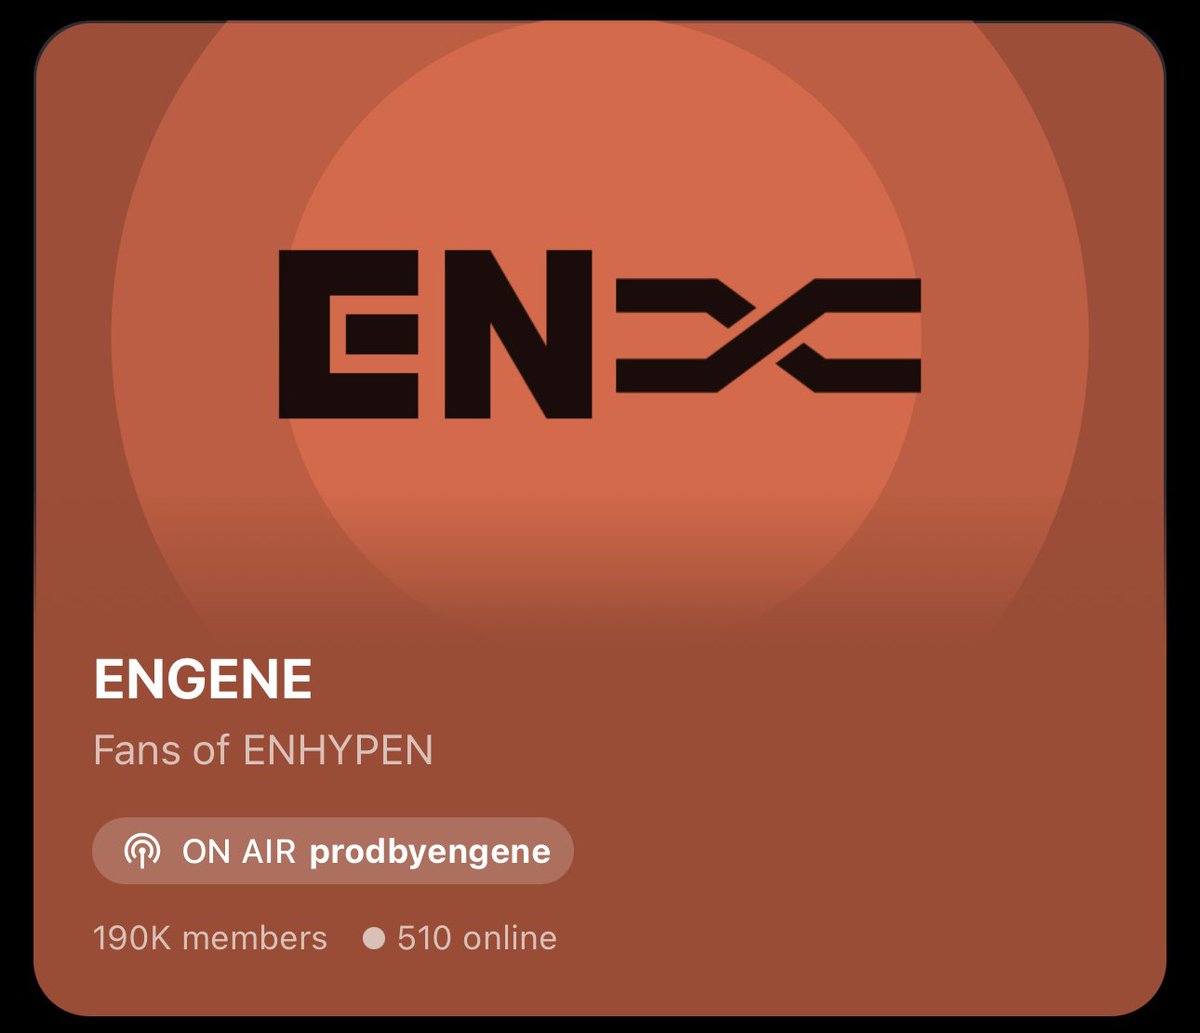 If you have a premium streaming account and want to hang out with other Engenes while streaming, come join us on Stationhead! 🎧 share.stationhead.com/x4ybkb51zx0s